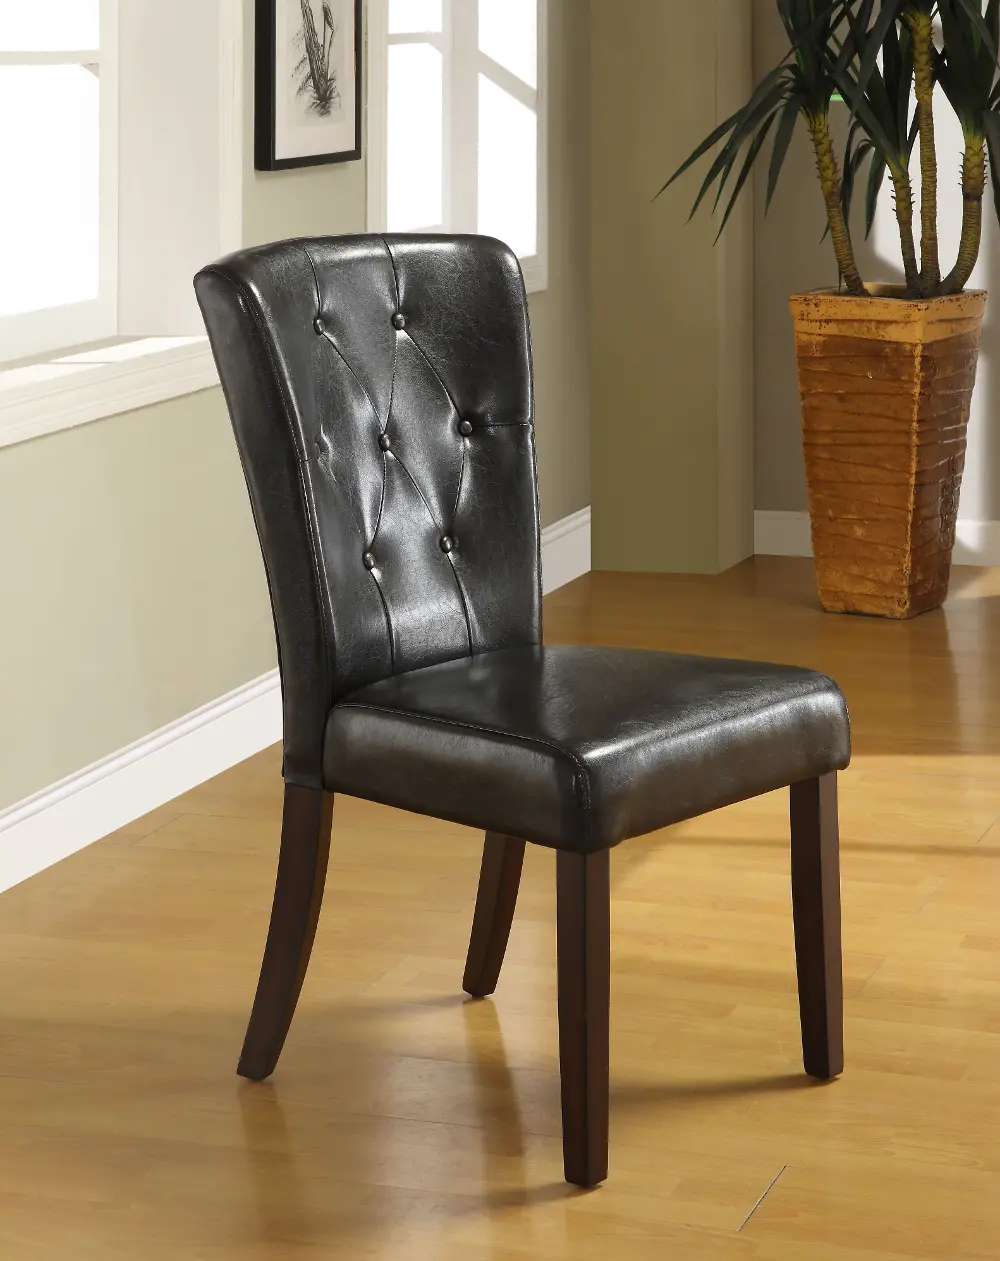 Dark Espresso Upholstered Dining Room Chair - Montreal-1